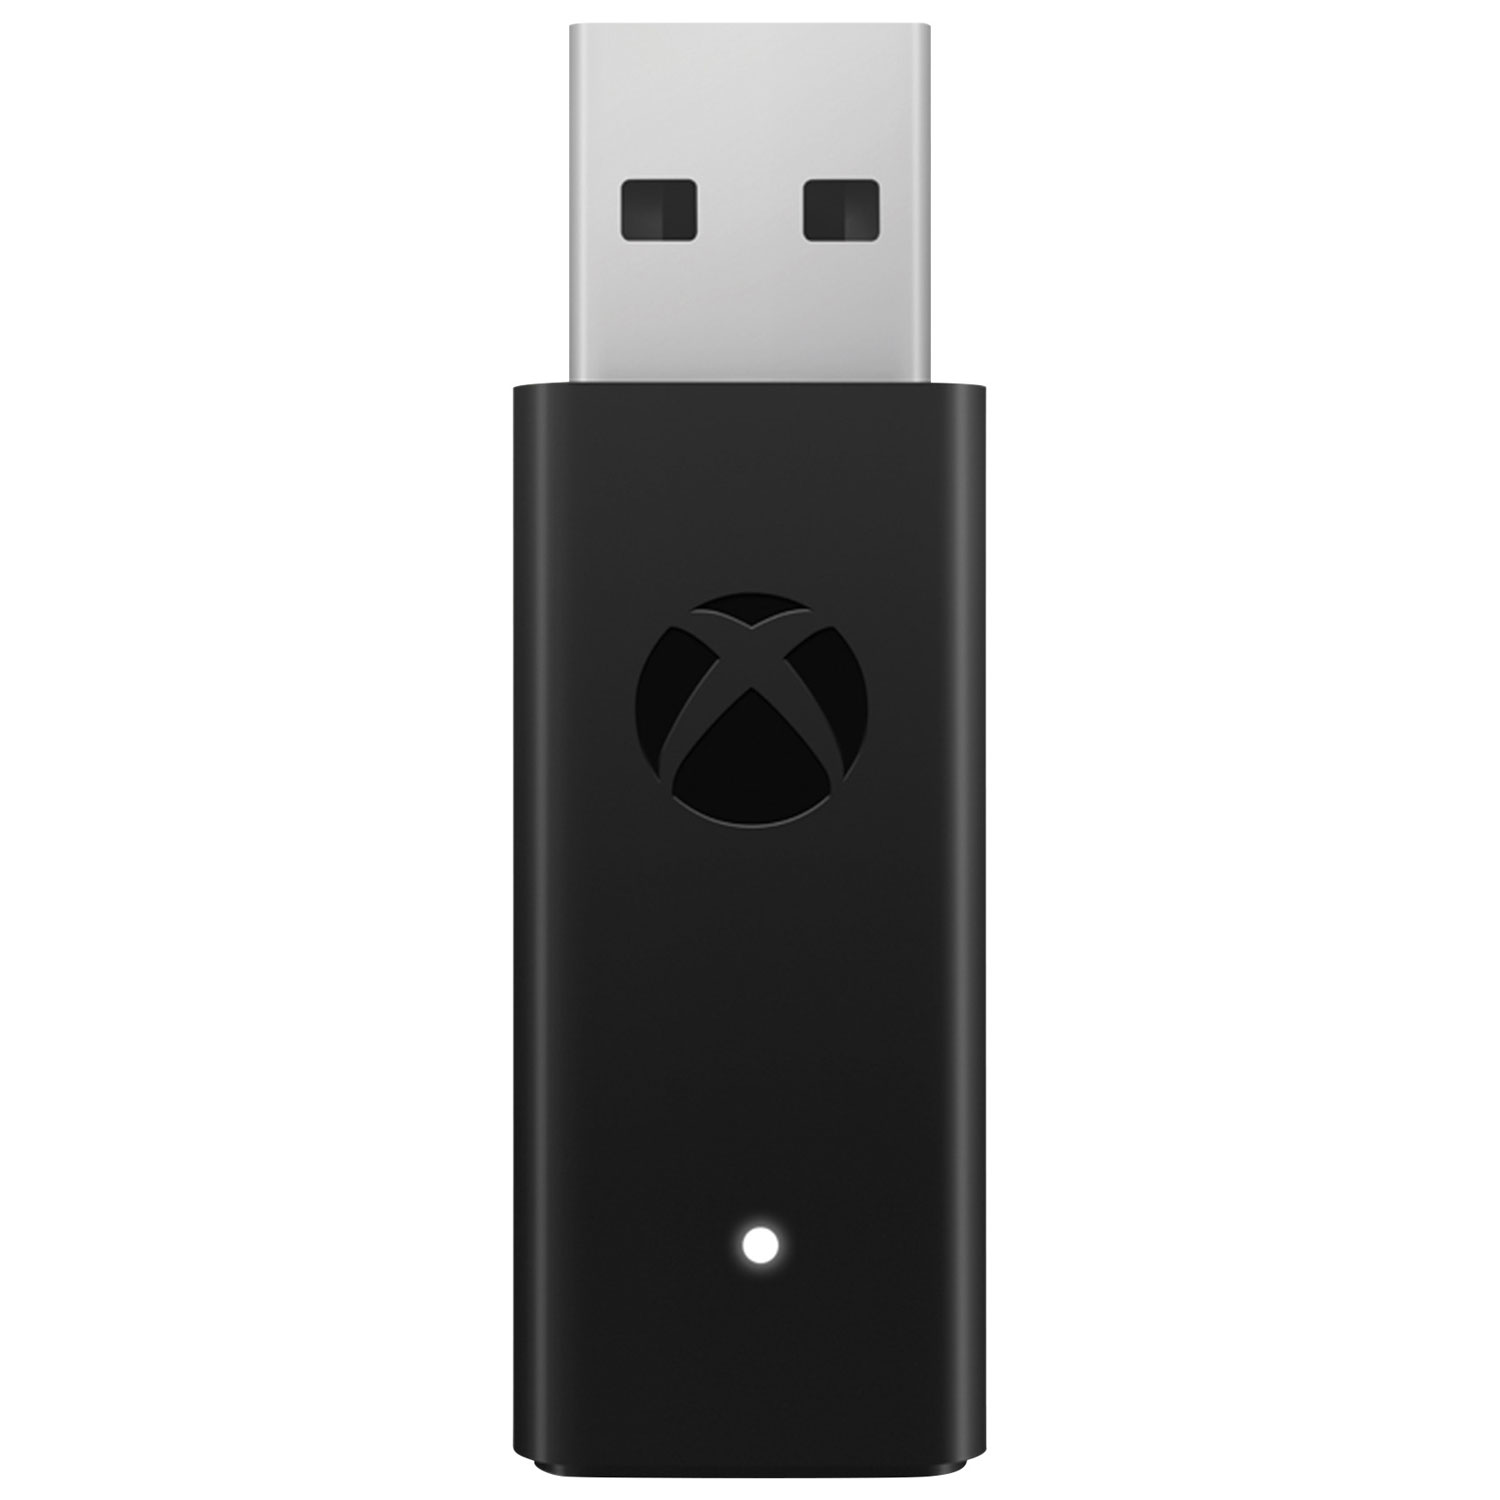 Xbox One Wireless Controller Adapter for Windows 10